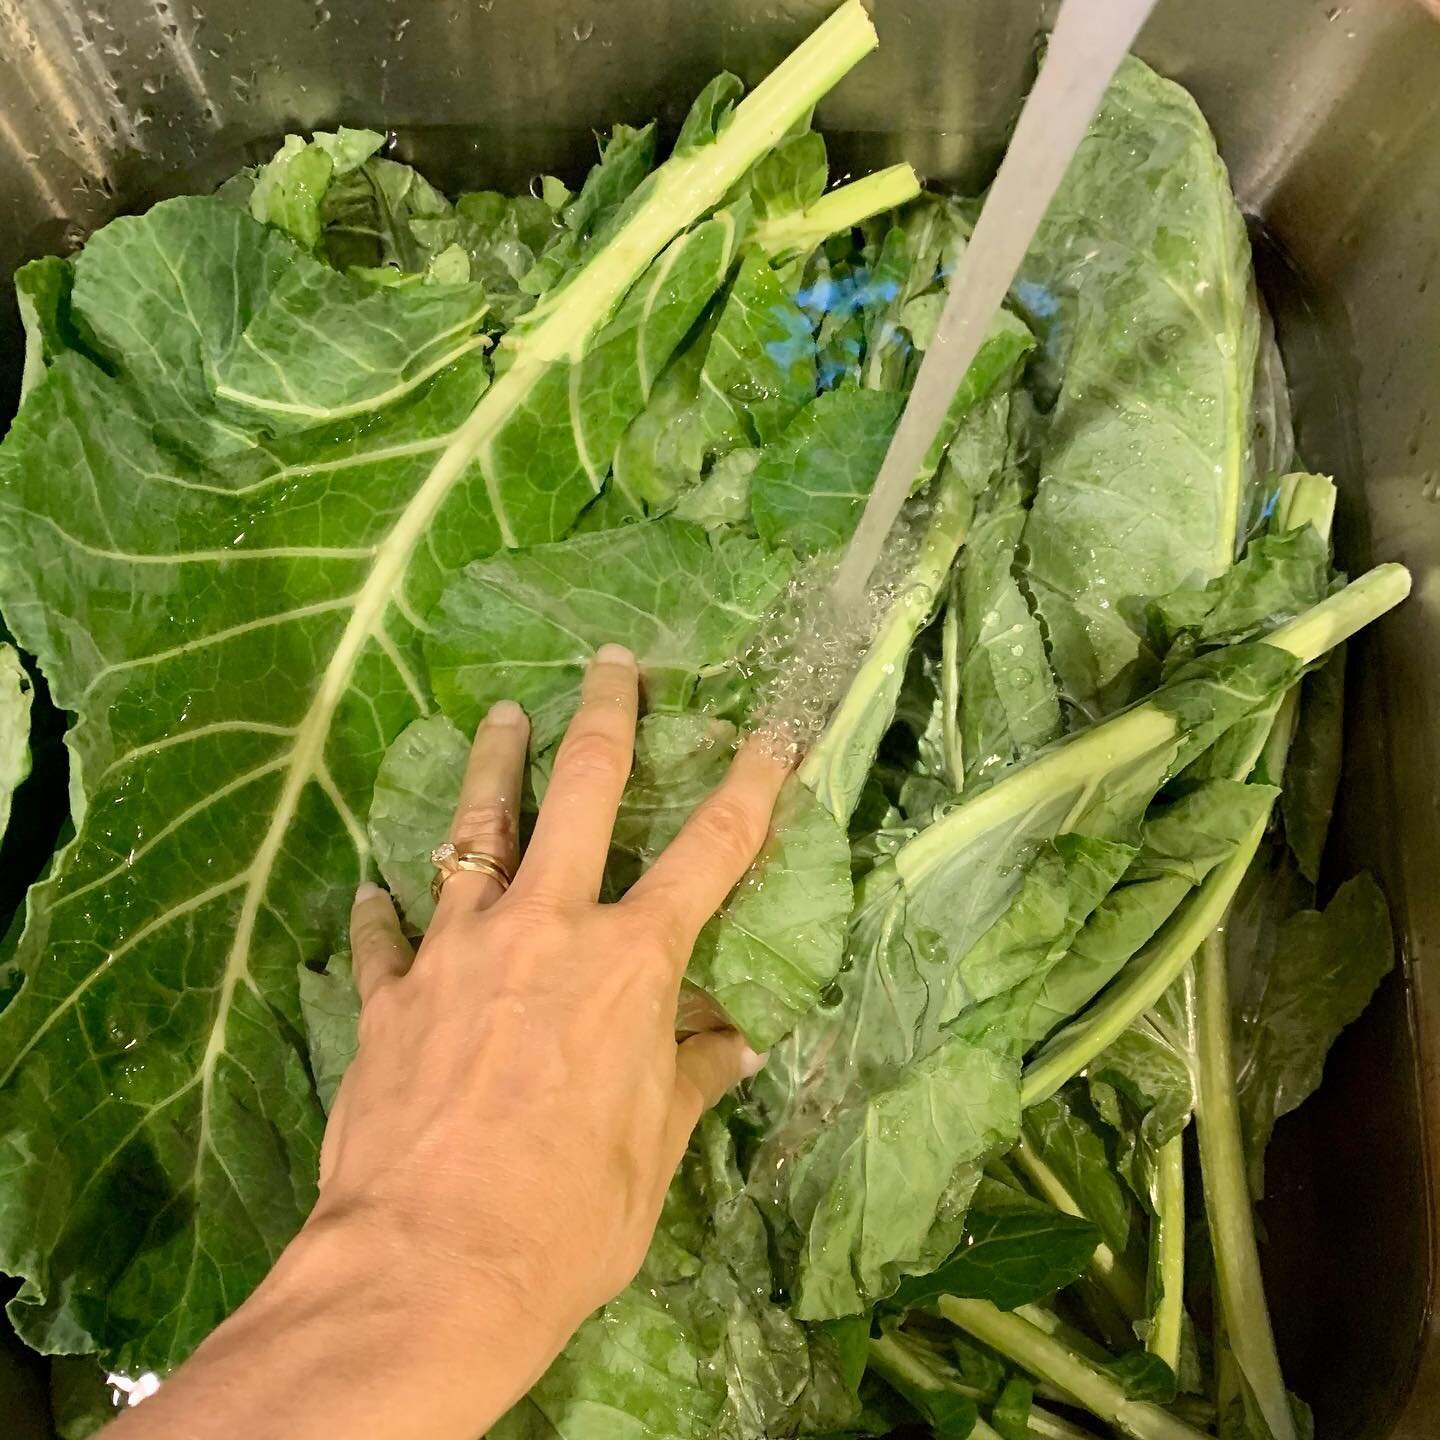 Embarking on Southern collards! Cooking them reduces oxalates, an antinutrient that blocks calcium absorption. So more calcium, plus...delish.